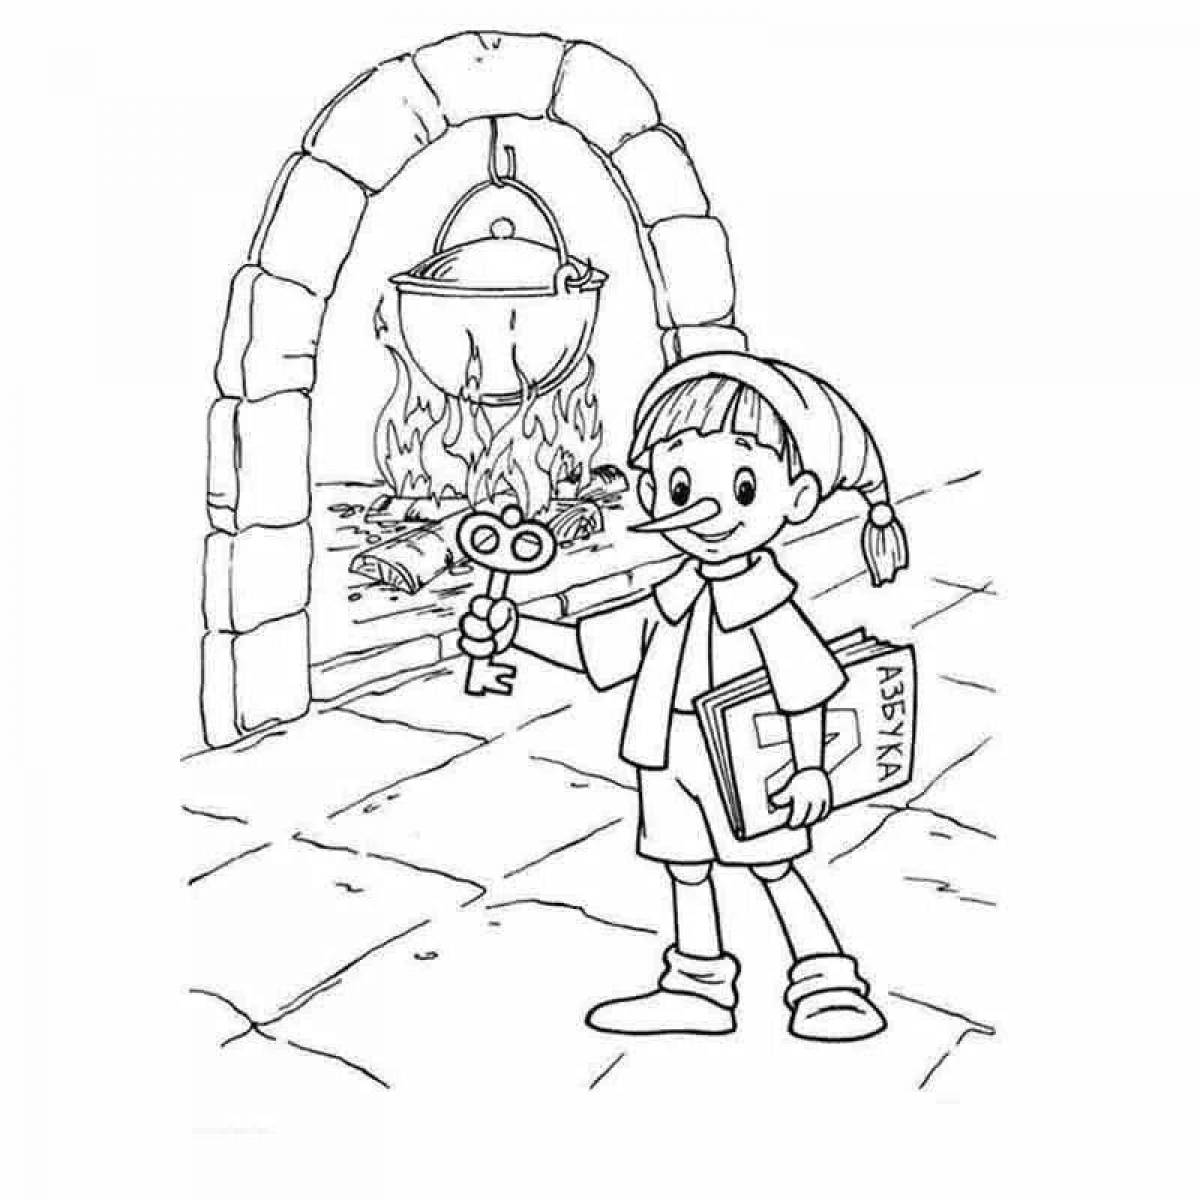 Sparkling pinocchio coloring page